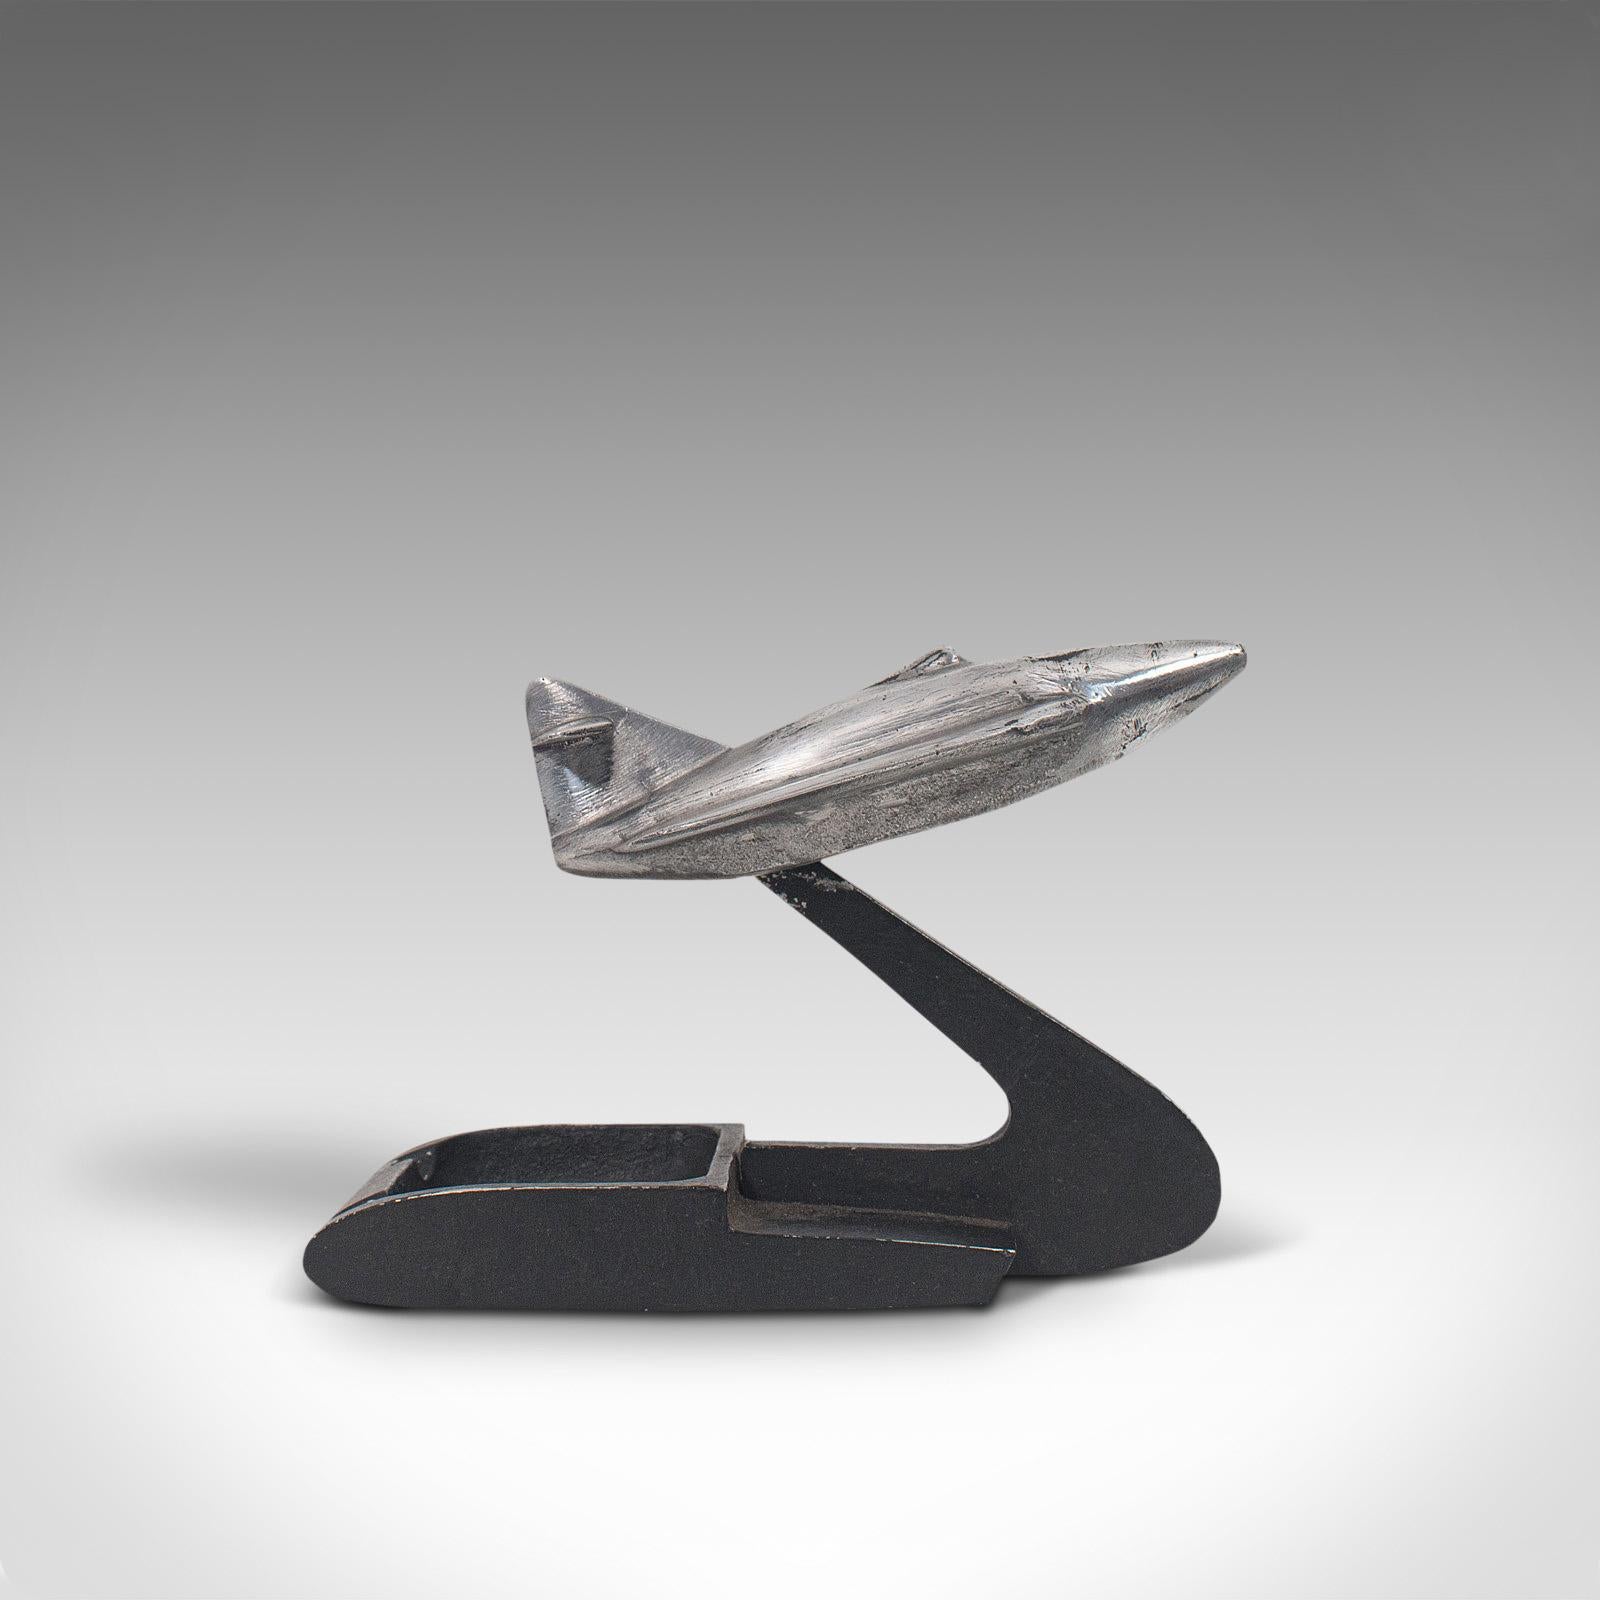 This is a vintage jet plane on stand. An English, cast alloy decorative desk ornament, dating to the early days of the jet age in the mid-20th century, circa 1960.

Oversee bombing raids at your desk with this wonderful jet
Displays a desirable